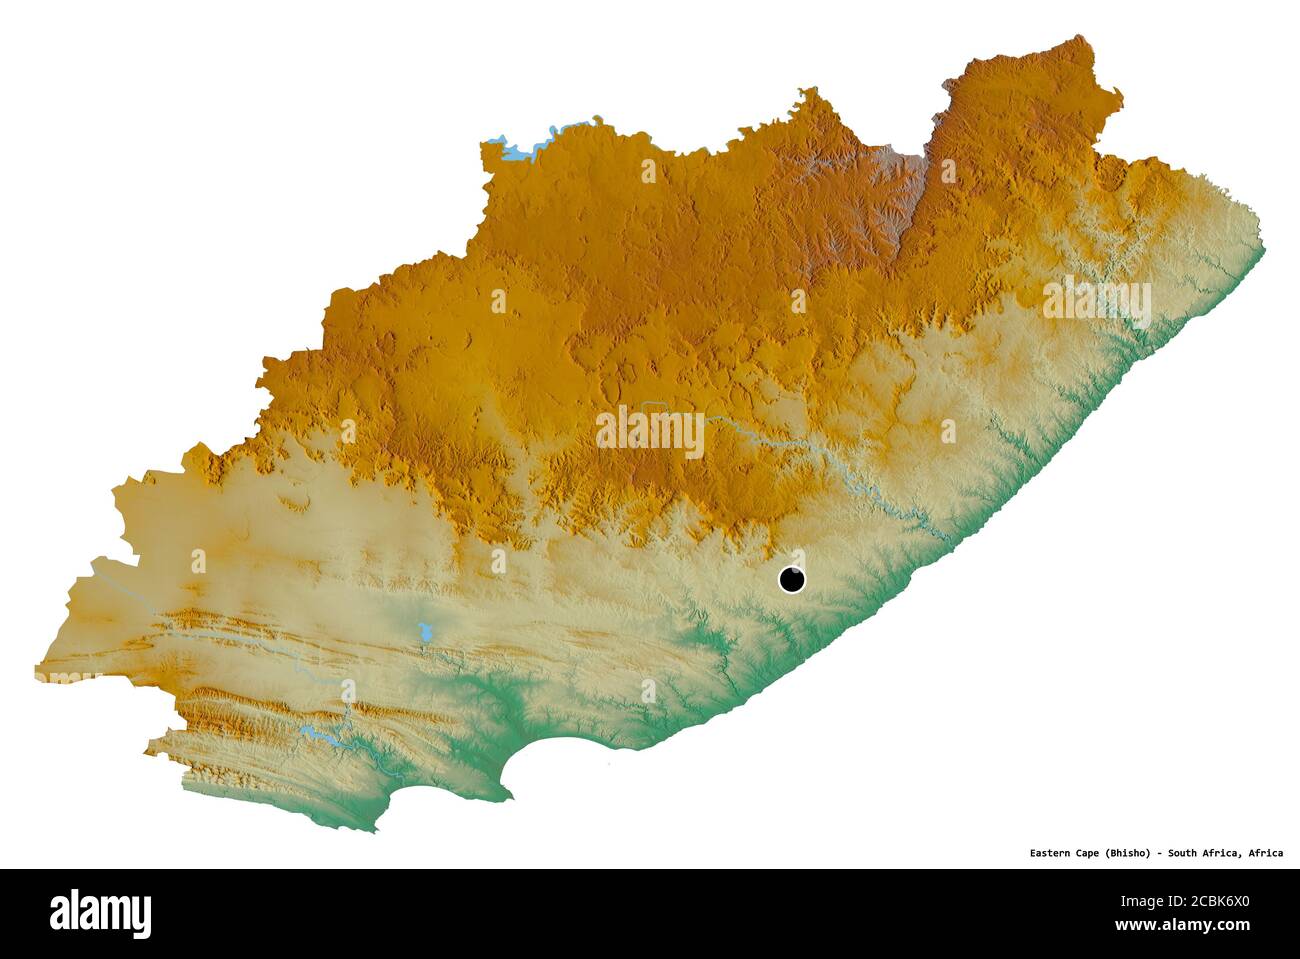 Shape of Eastern Cape, province of South Africa, with its capital isolated on white background. Topographic relief map. 3D rendering Stock Photo